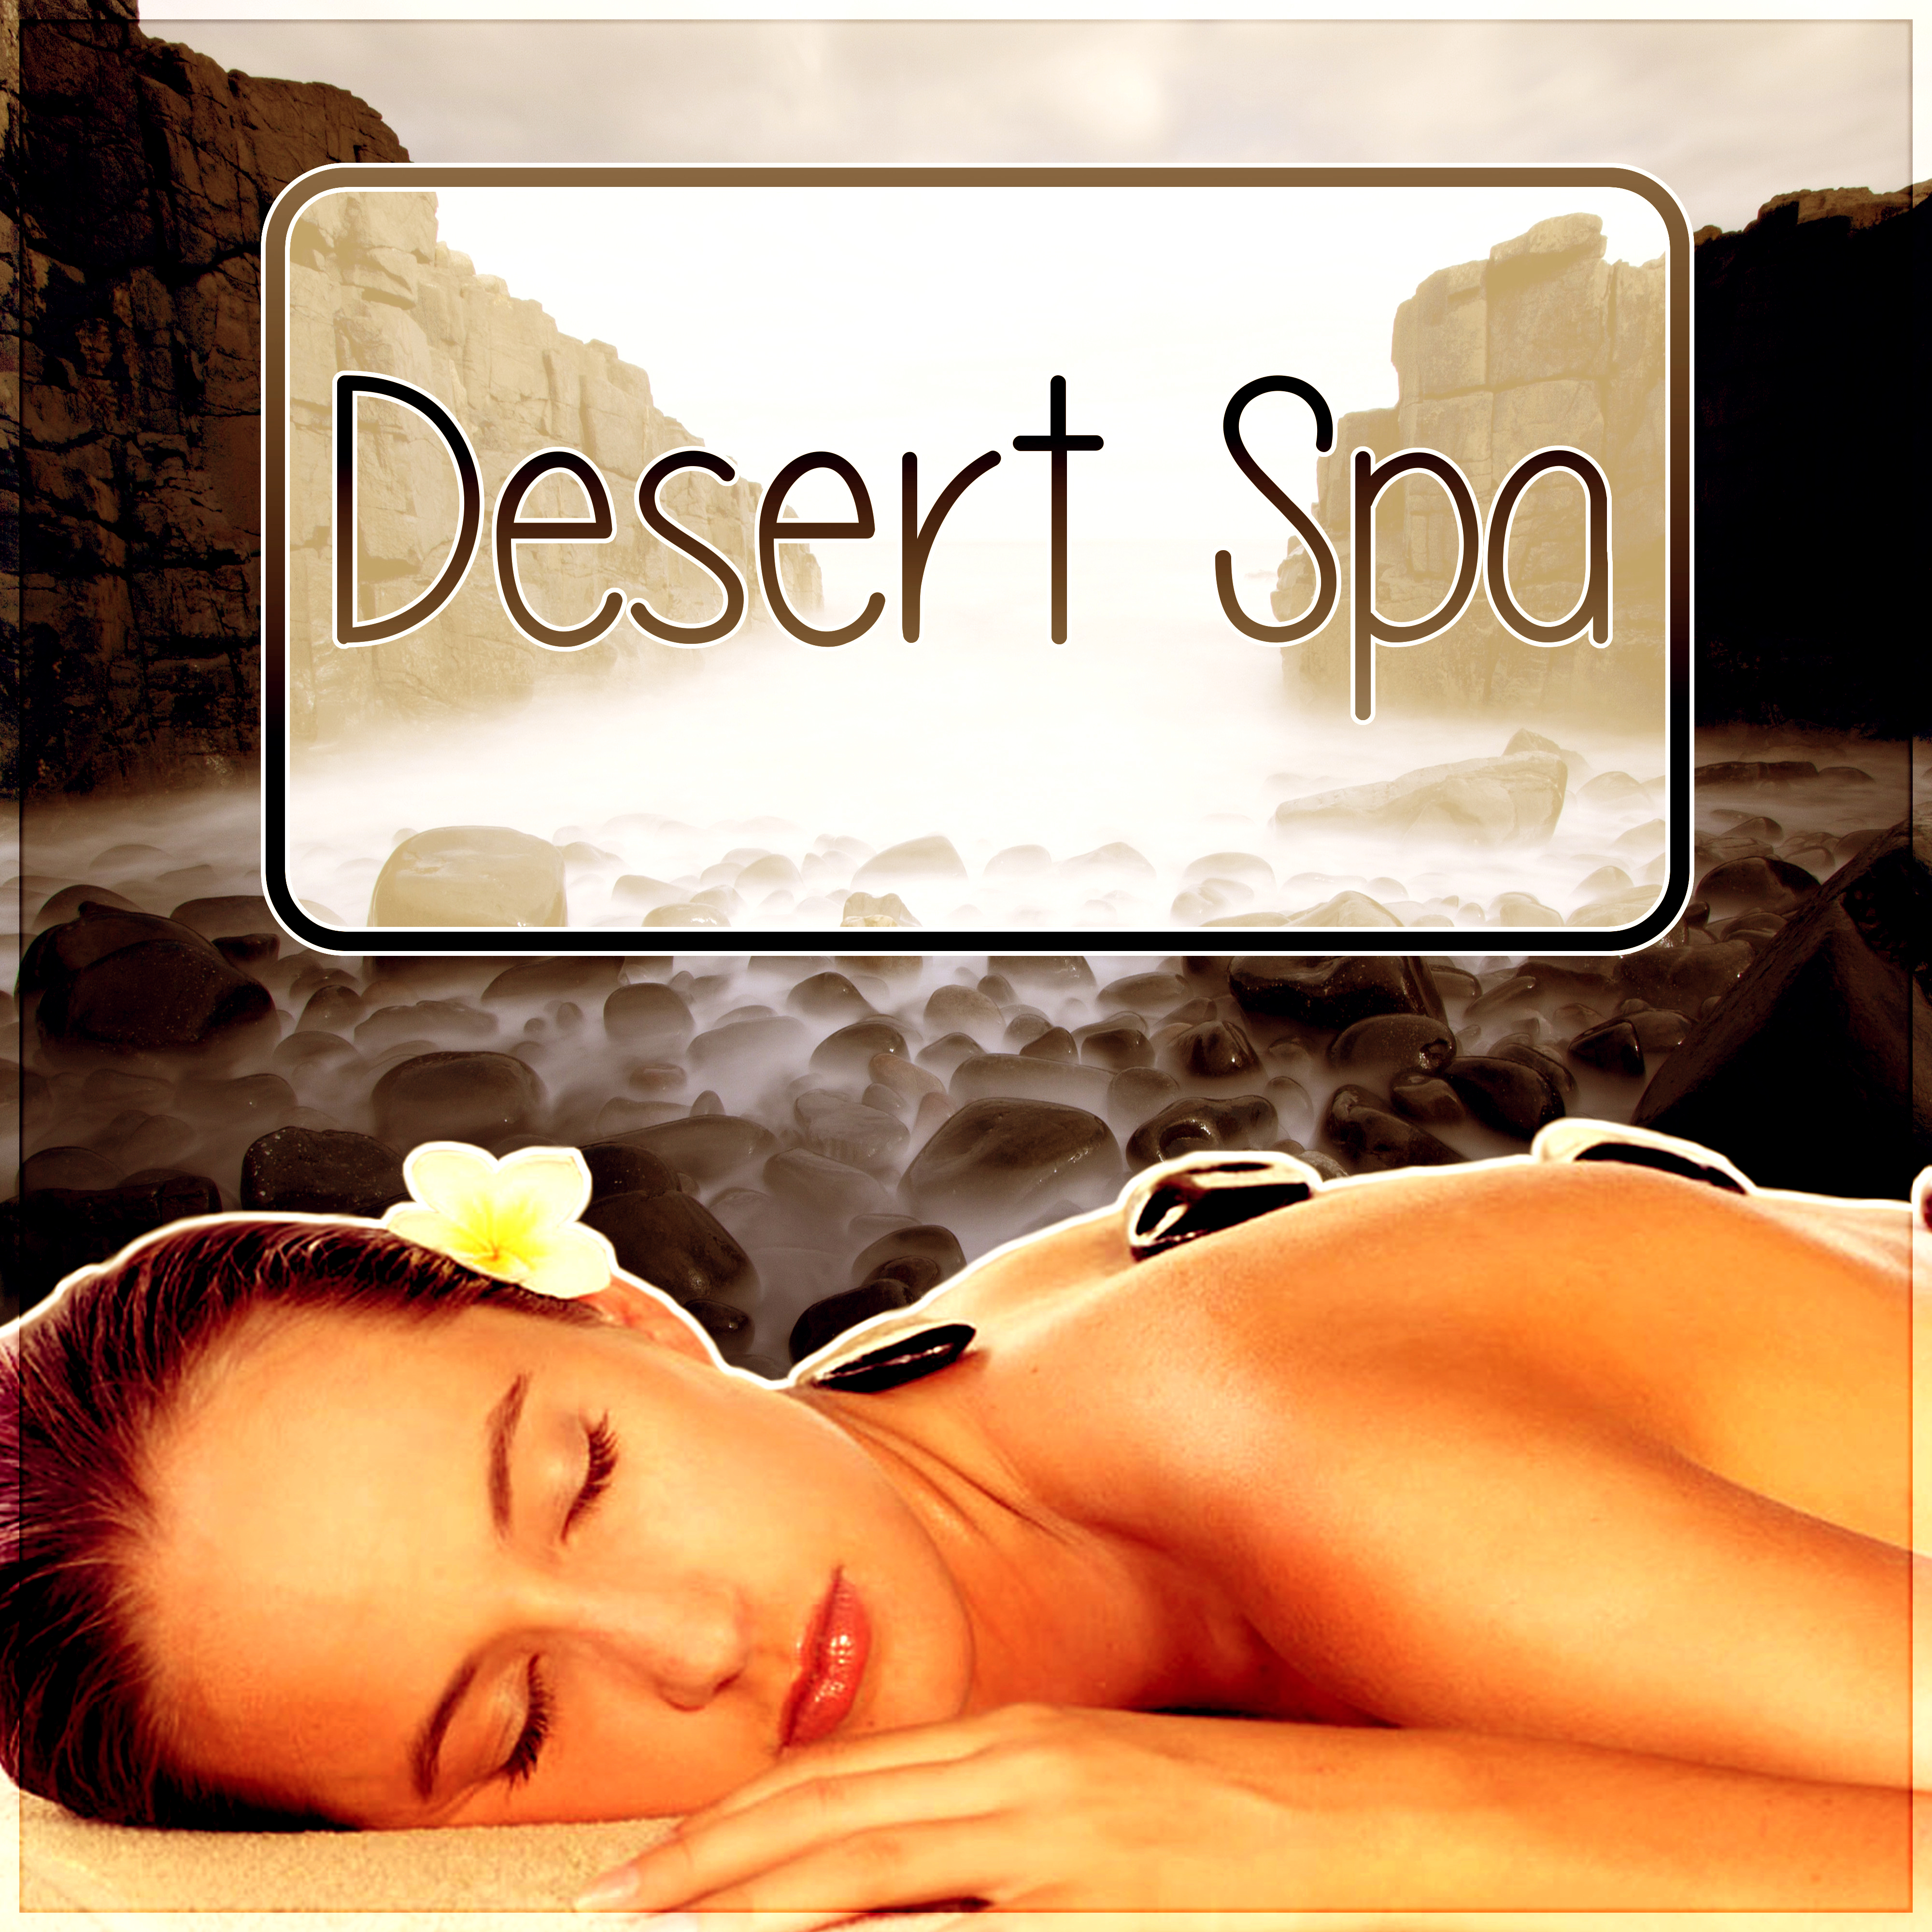 Desert Spa - Relaxing Nature Sounds Healing Music for Yoga, Native American Flute Meditation, Instrumental Music for Massage Therapy, Reiki Healing